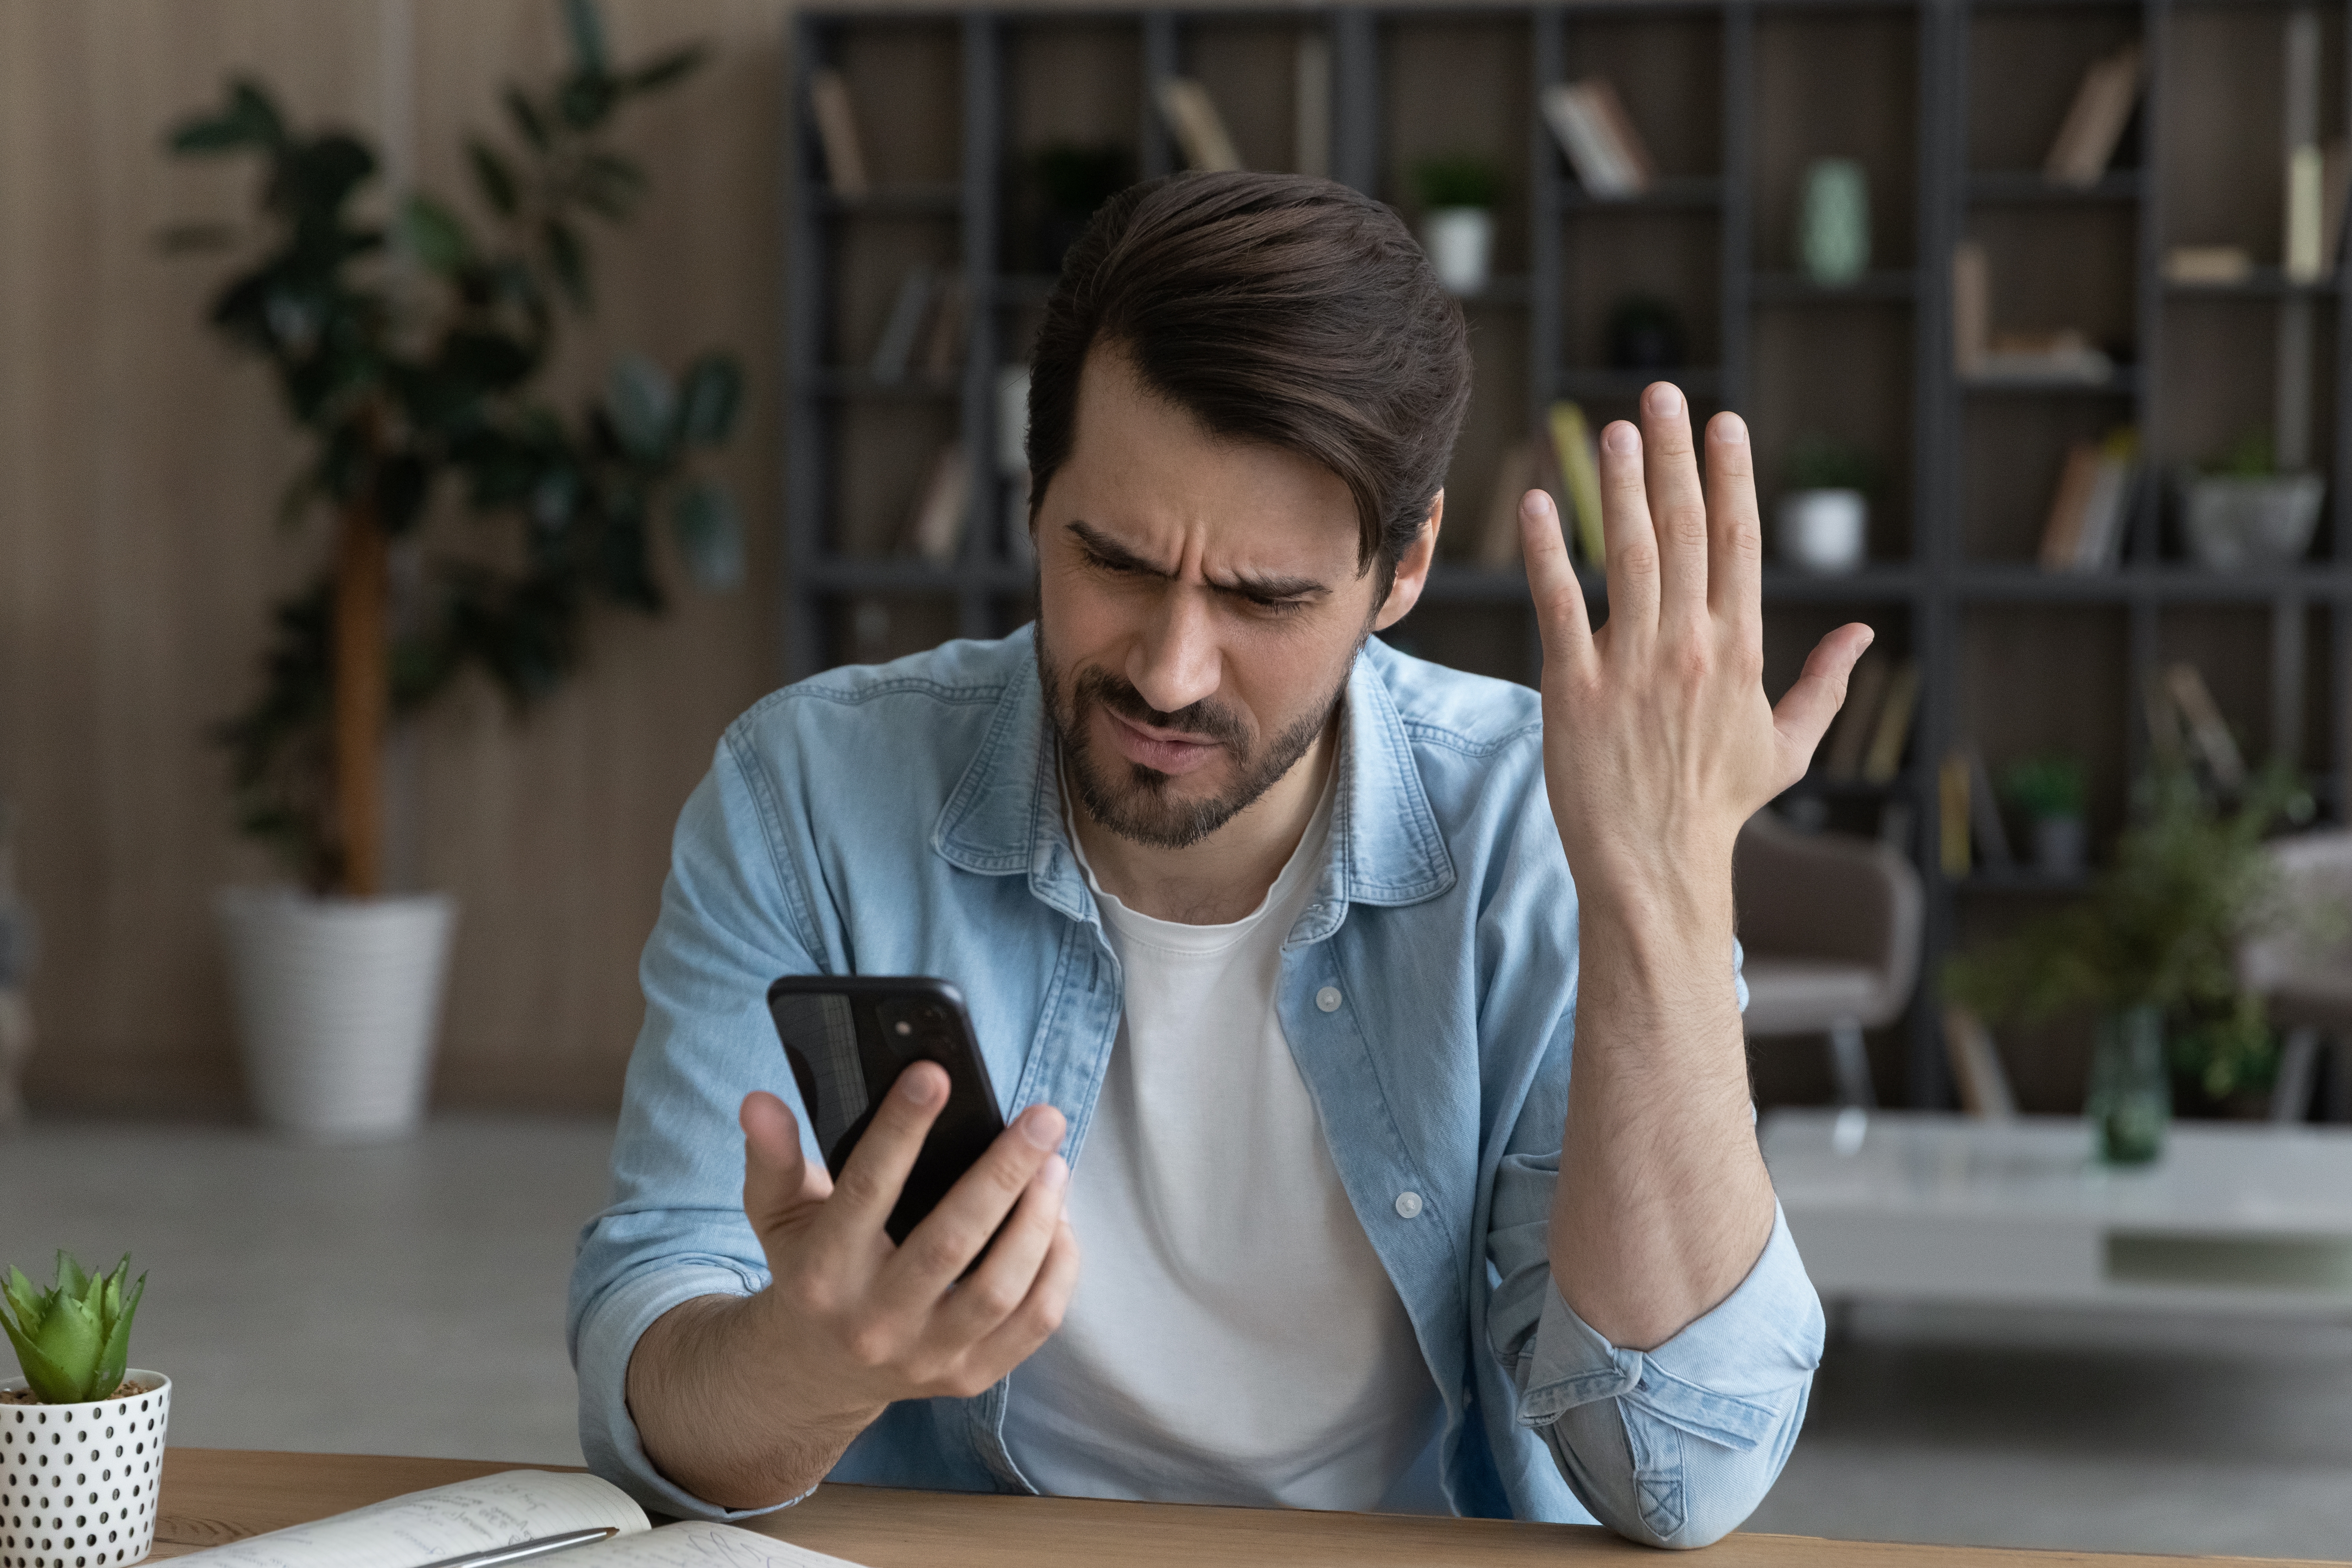 An angry man looking at a phone | Source: Shutterstock